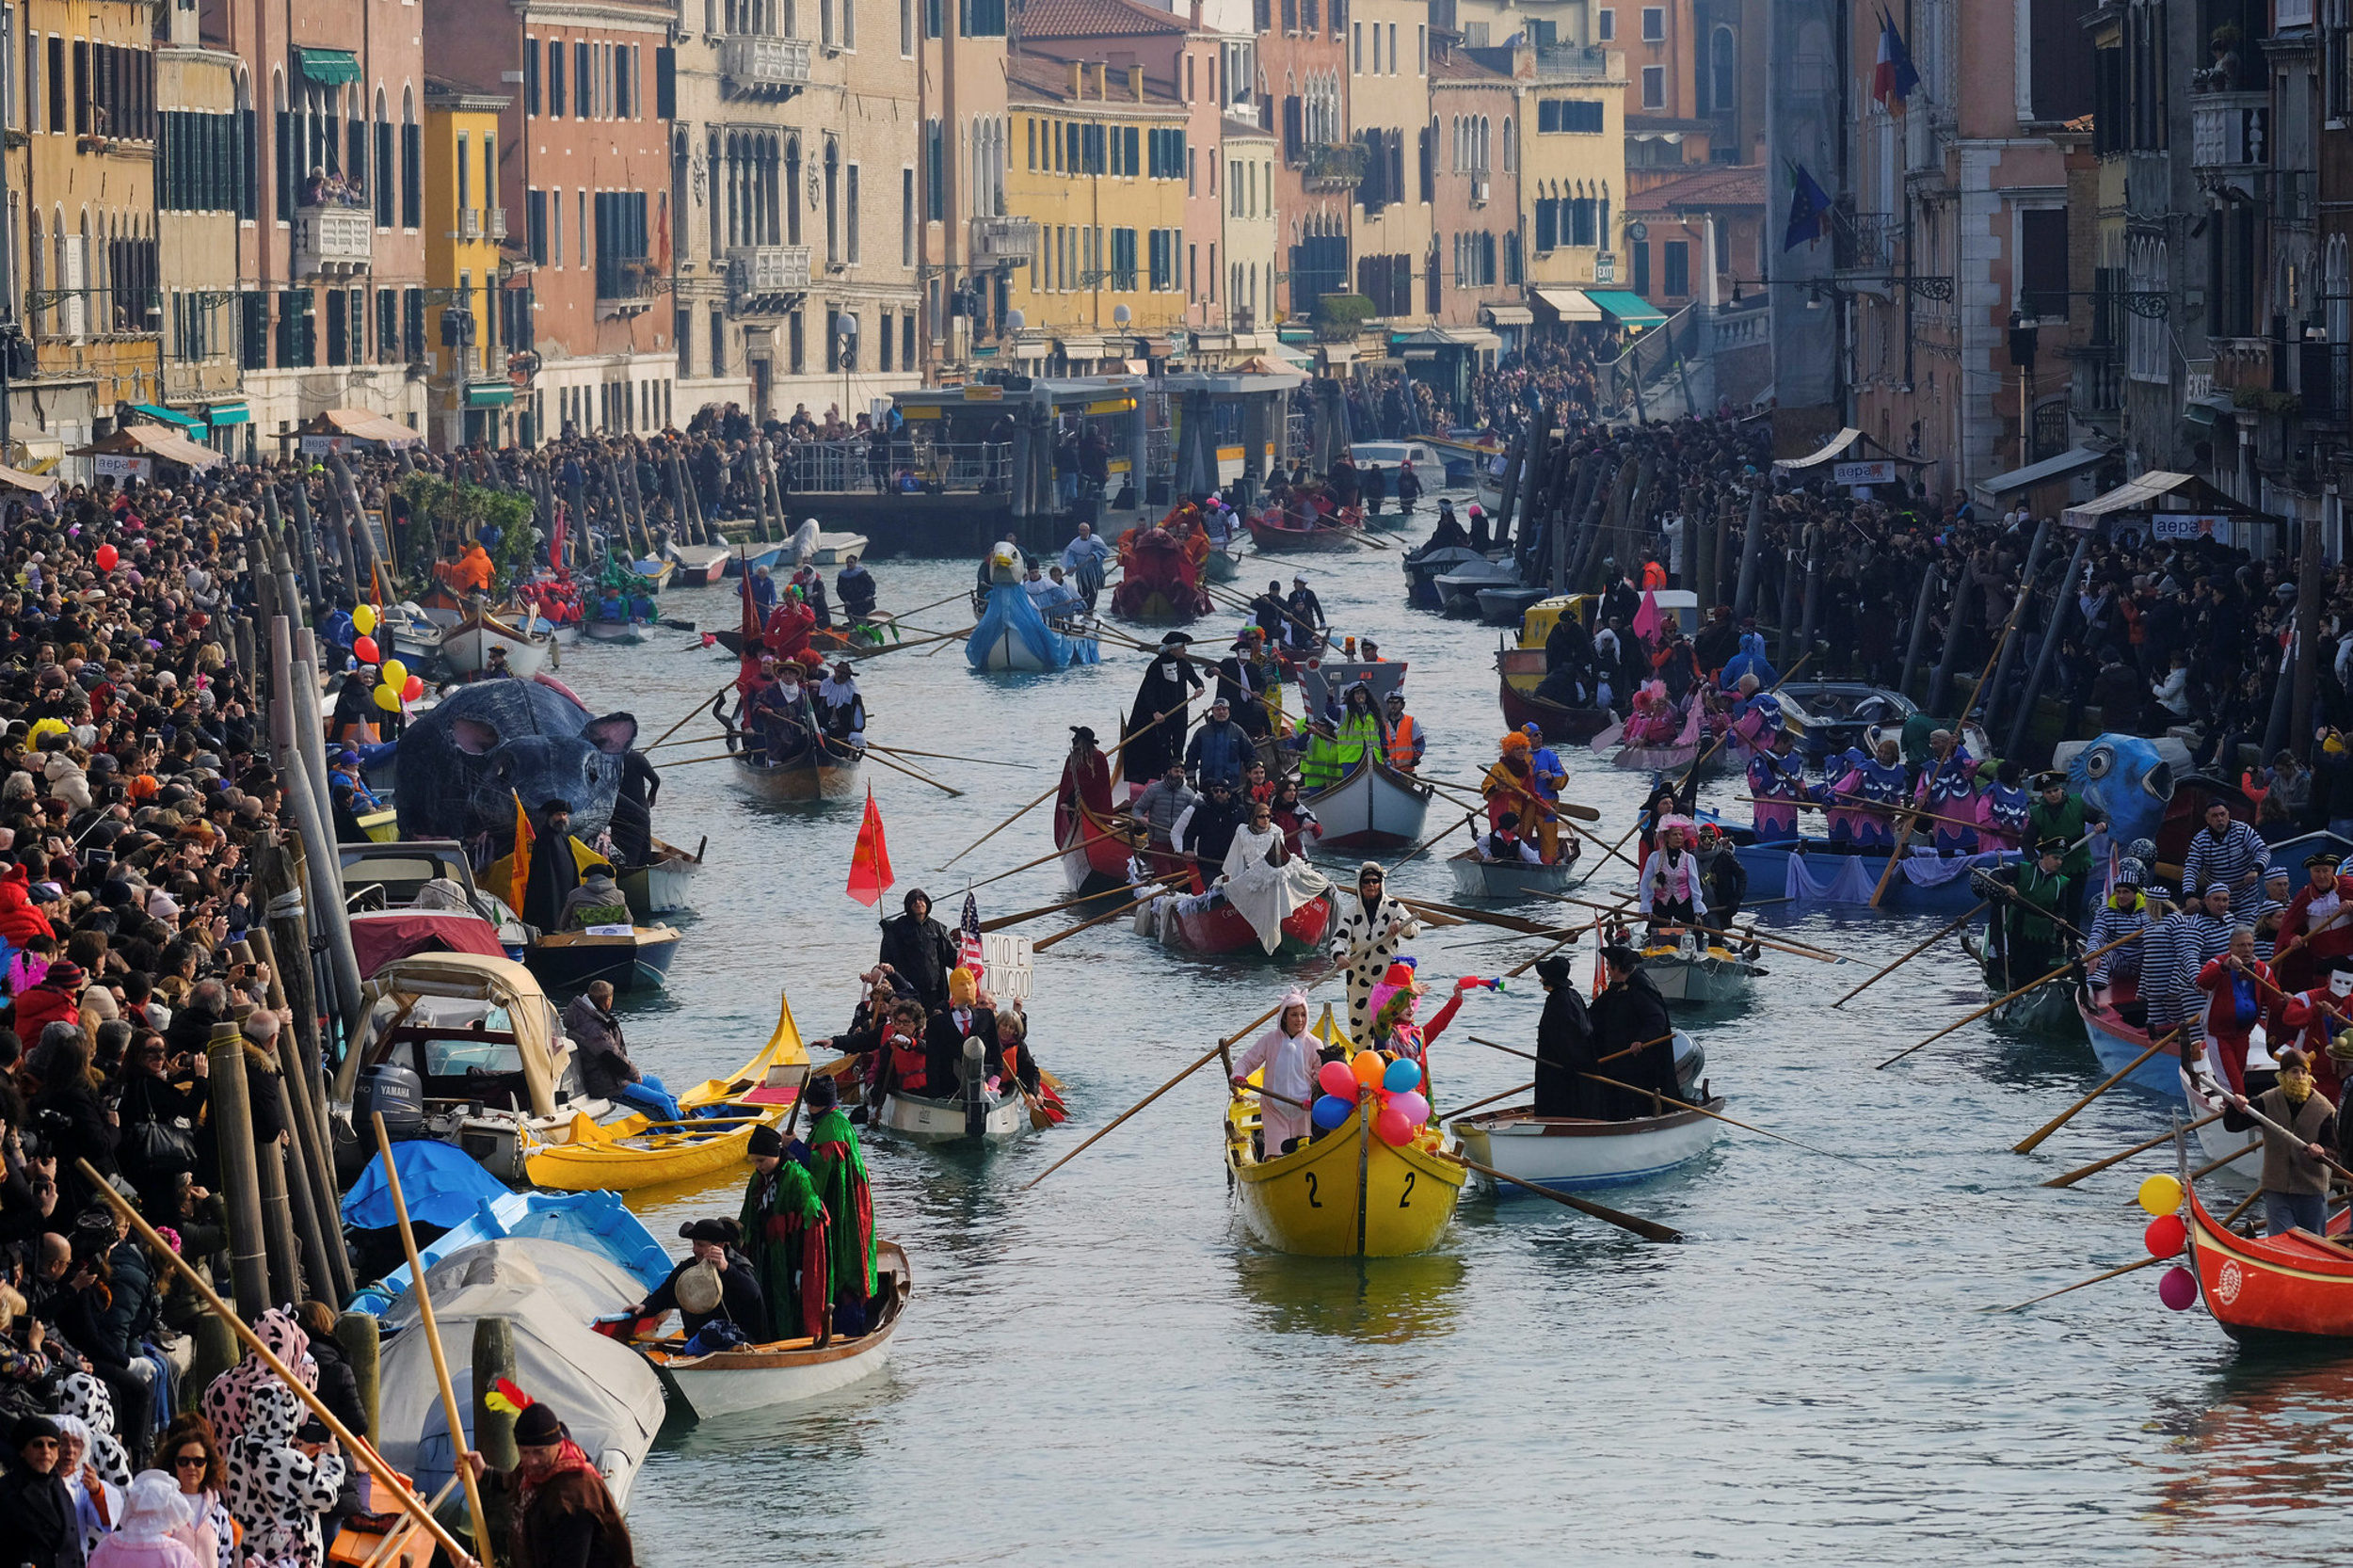 <p>Every February, the city hosts a carnival where three million people dress up in costumes and dance until dawn. It's the closest thing to Fellini-esque Venice has to offer. </p><p>You may also like: <a href='https://www.yardbarker.com/lifestyle/articles/20_big_batch_cocktails_that_are_perfect_for_small_gatherings_092523/s1__34869380'>20 big-batch cocktails that are perfect for small gatherings</a></p>